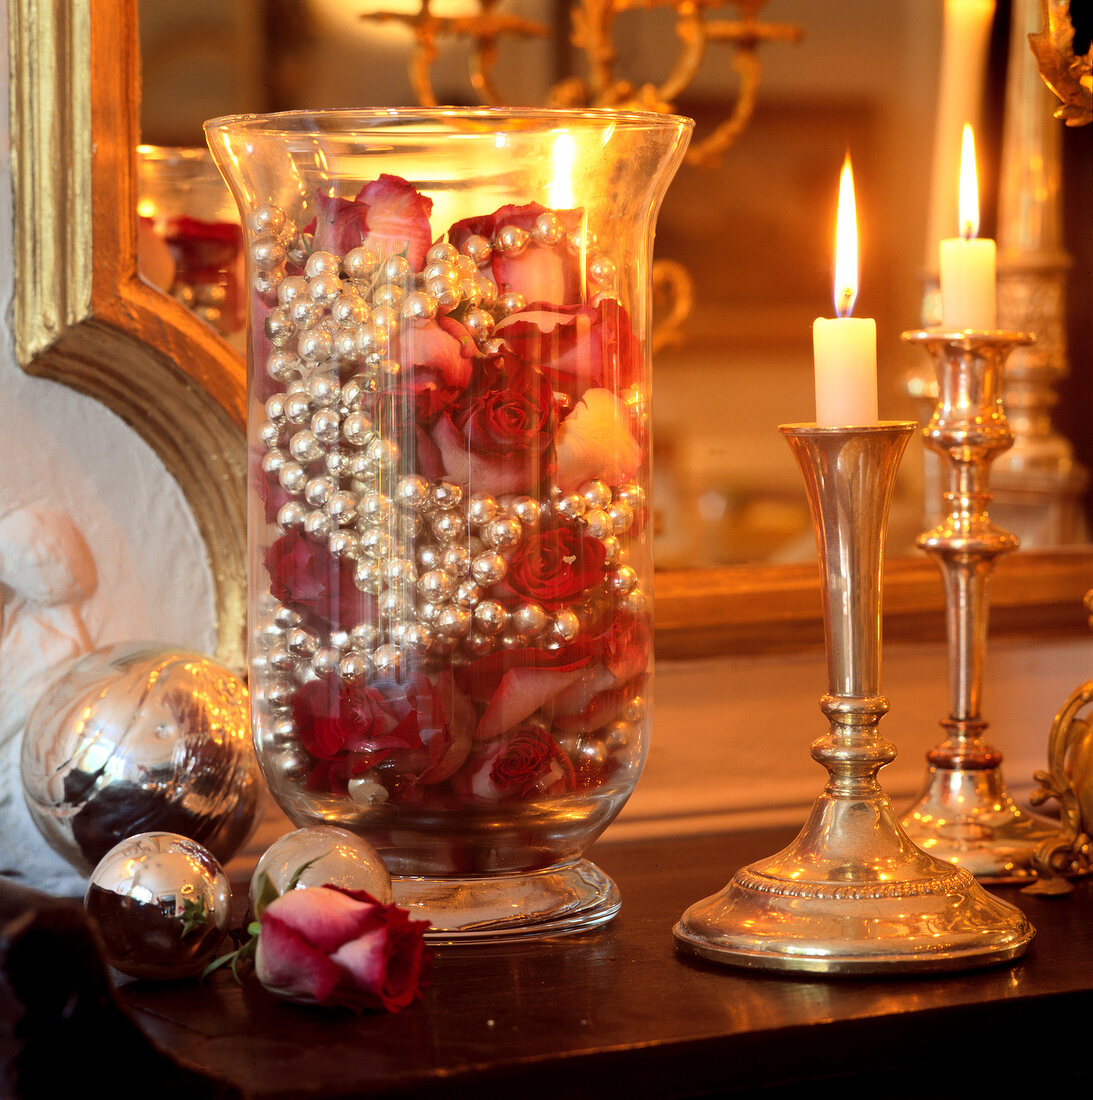 Roses and silver chain in large glass lantern beside lit candle